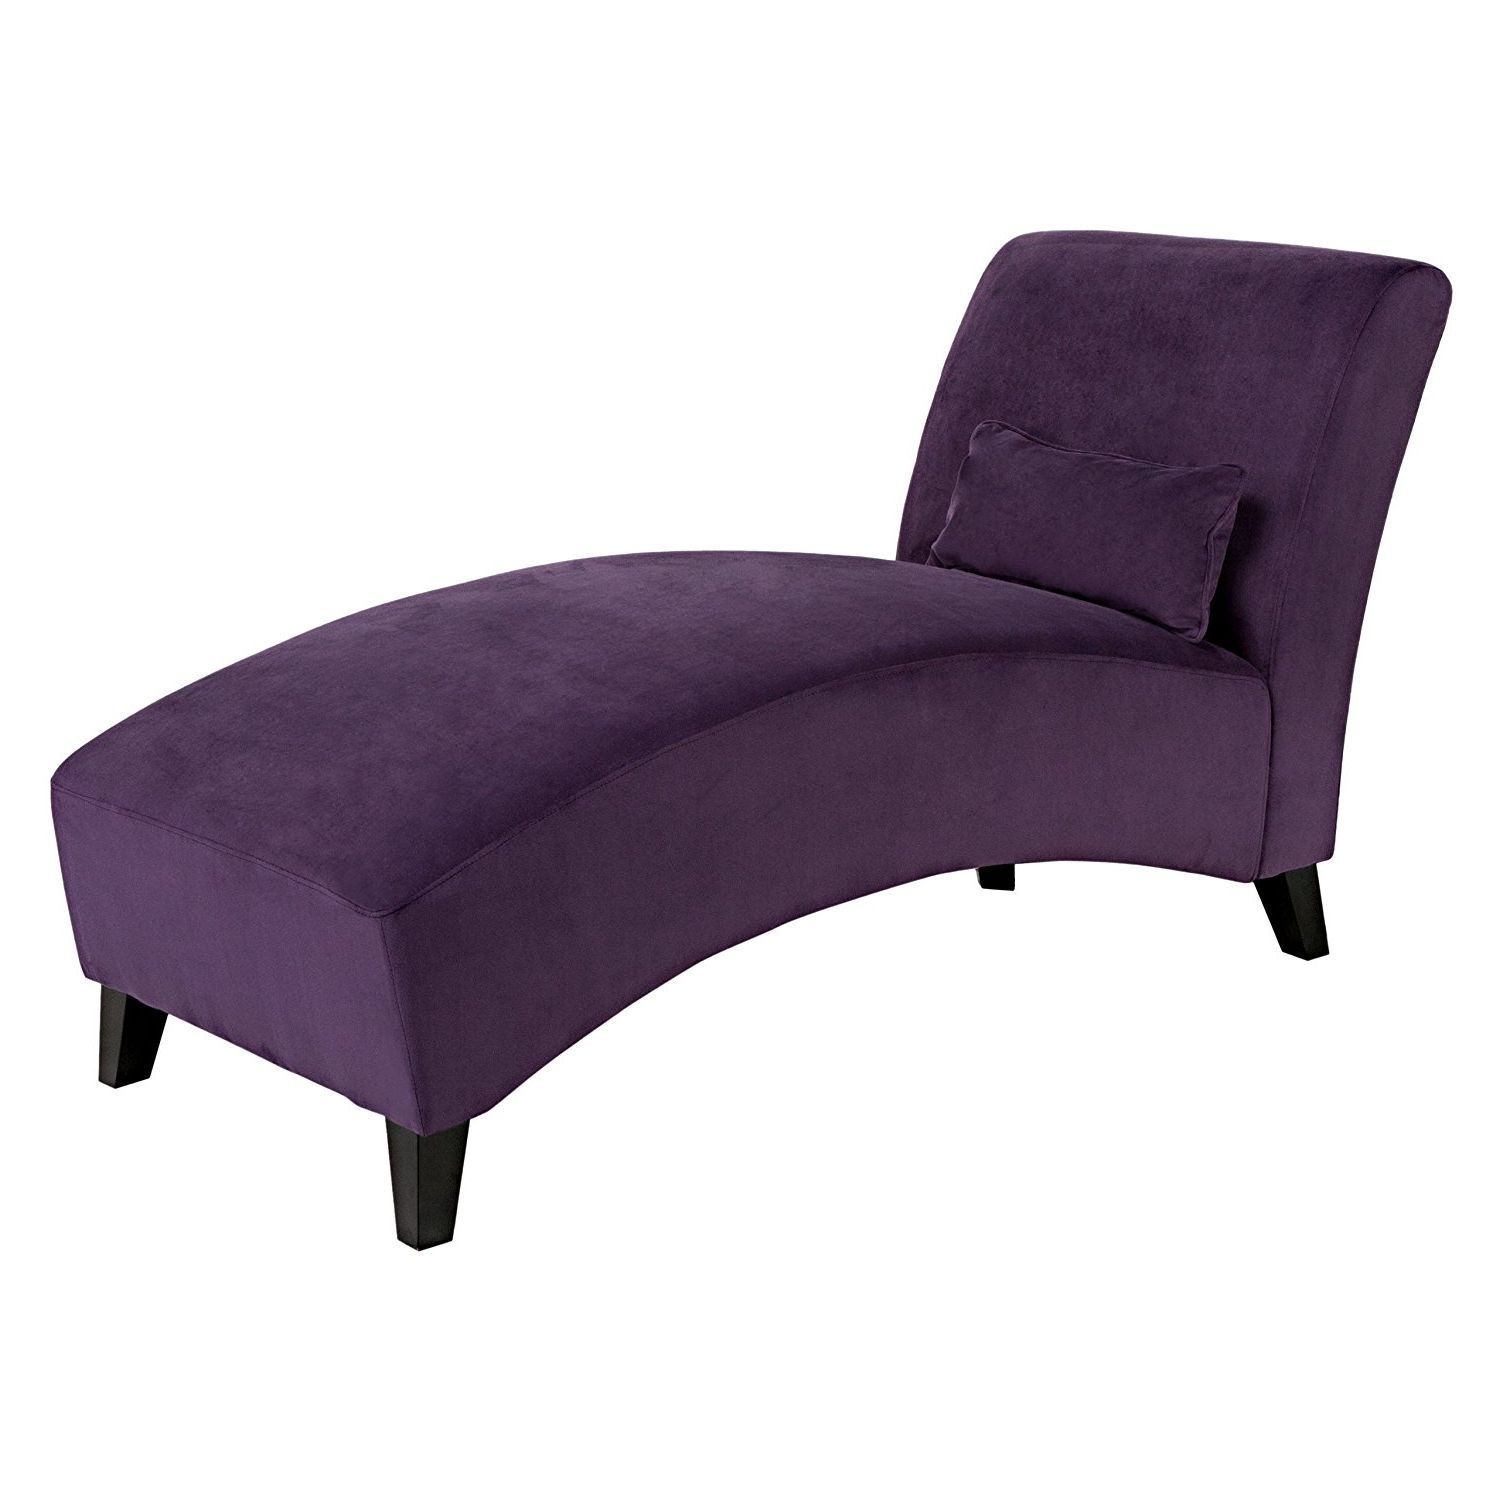 Most Up To Date Amazon: Handy Living Chaise Lounge Chair, Purple: Kitchen & Dining For Velvet Chaise Lounge Chairs (View 5 of 15)